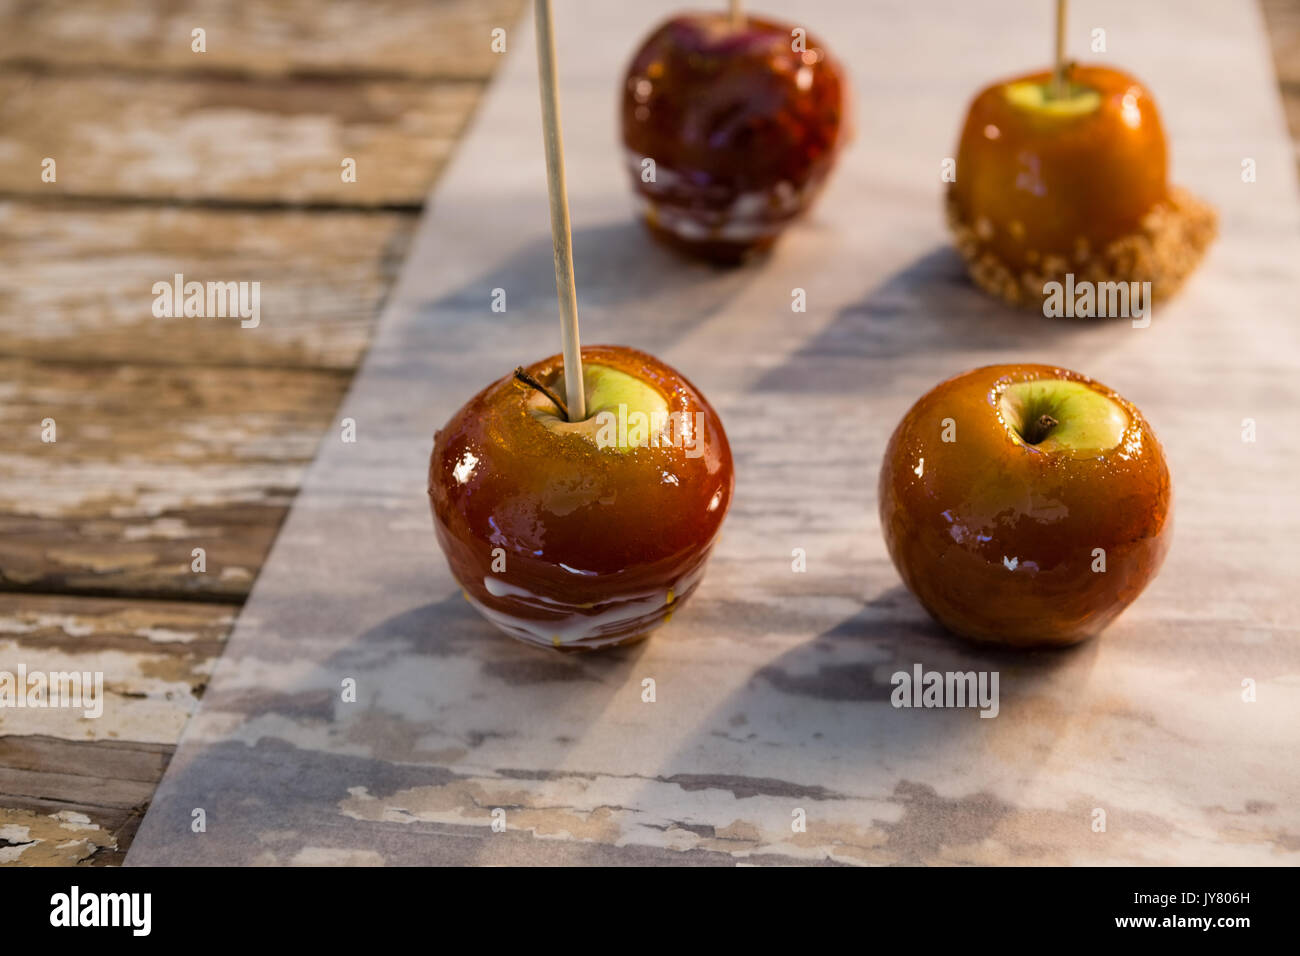 Close up of caramelized apple on table Stock Photo